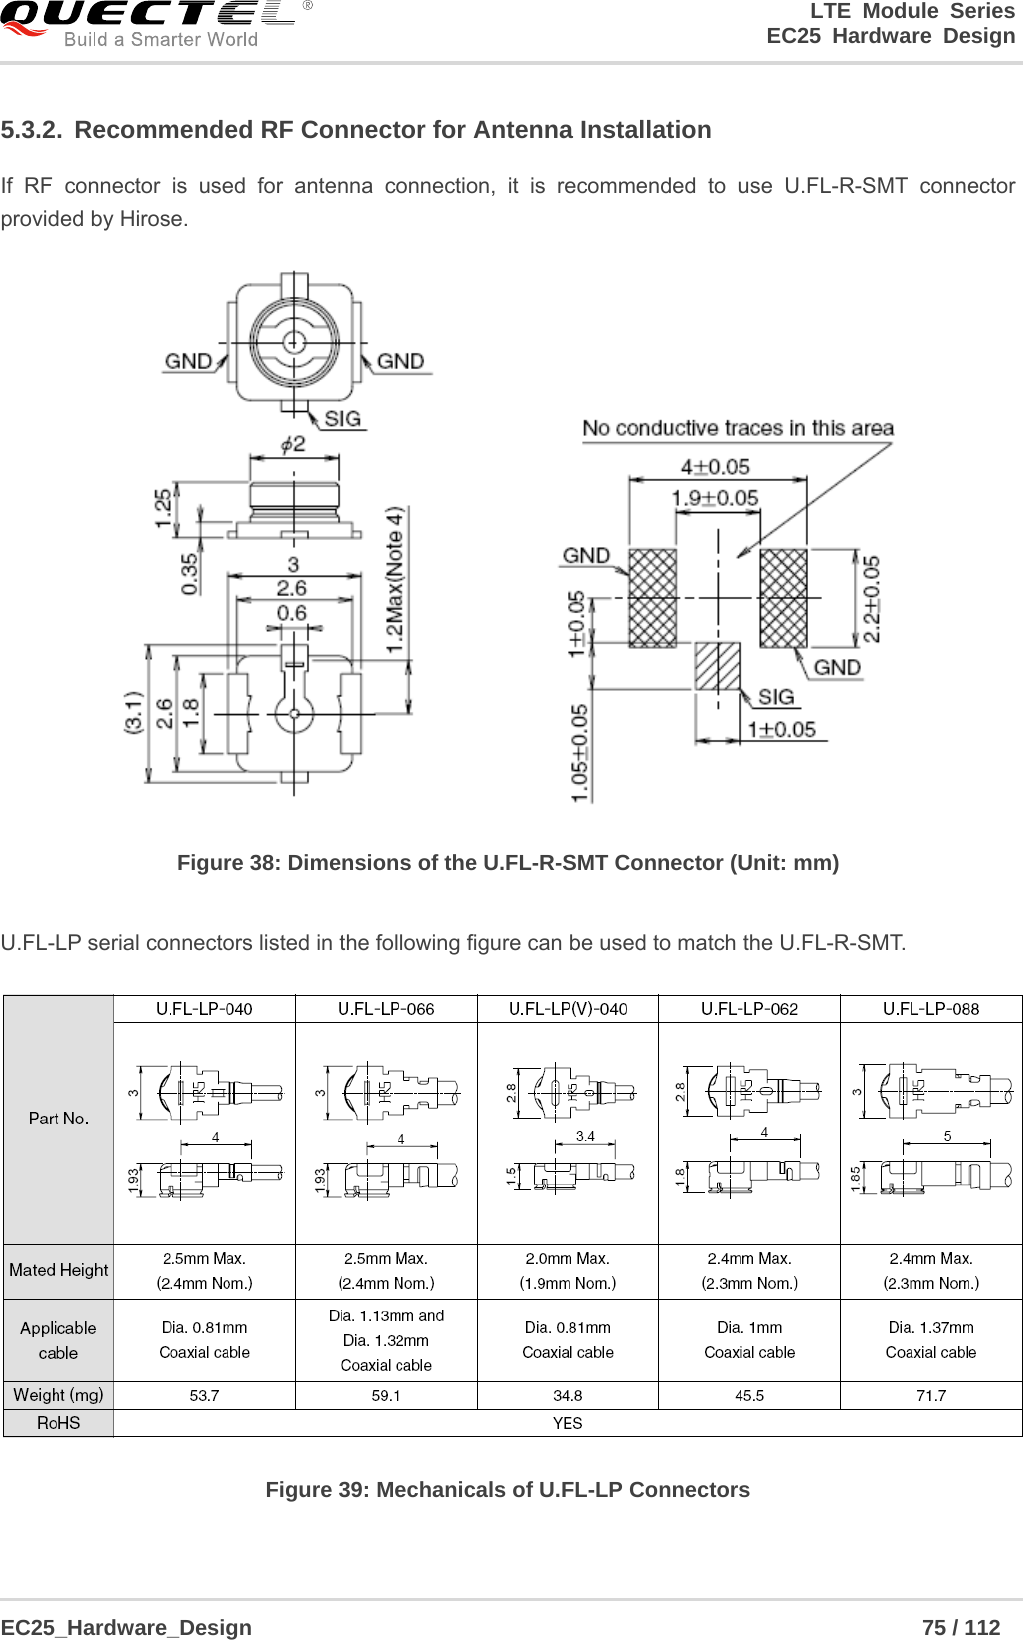 LTE Module Series                                                  EC25 Hardware Design  EC25_Hardware_Design                                                             75 / 112    5.3.2.  Recommended RF Connector for Antenna Installation If RF connector is used for antenna connection, it is recommended to use U.FL-R-SMT connector provided by Hirose.  Figure 38: Dimensions of the U.FL-R-SMT Connector (Unit: mm)  U.FL-LP serial connectors listed in the following figure can be used to match the U.FL-R-SMT.  Figure 39: Mechanicals of U.FL-LP Connectors 